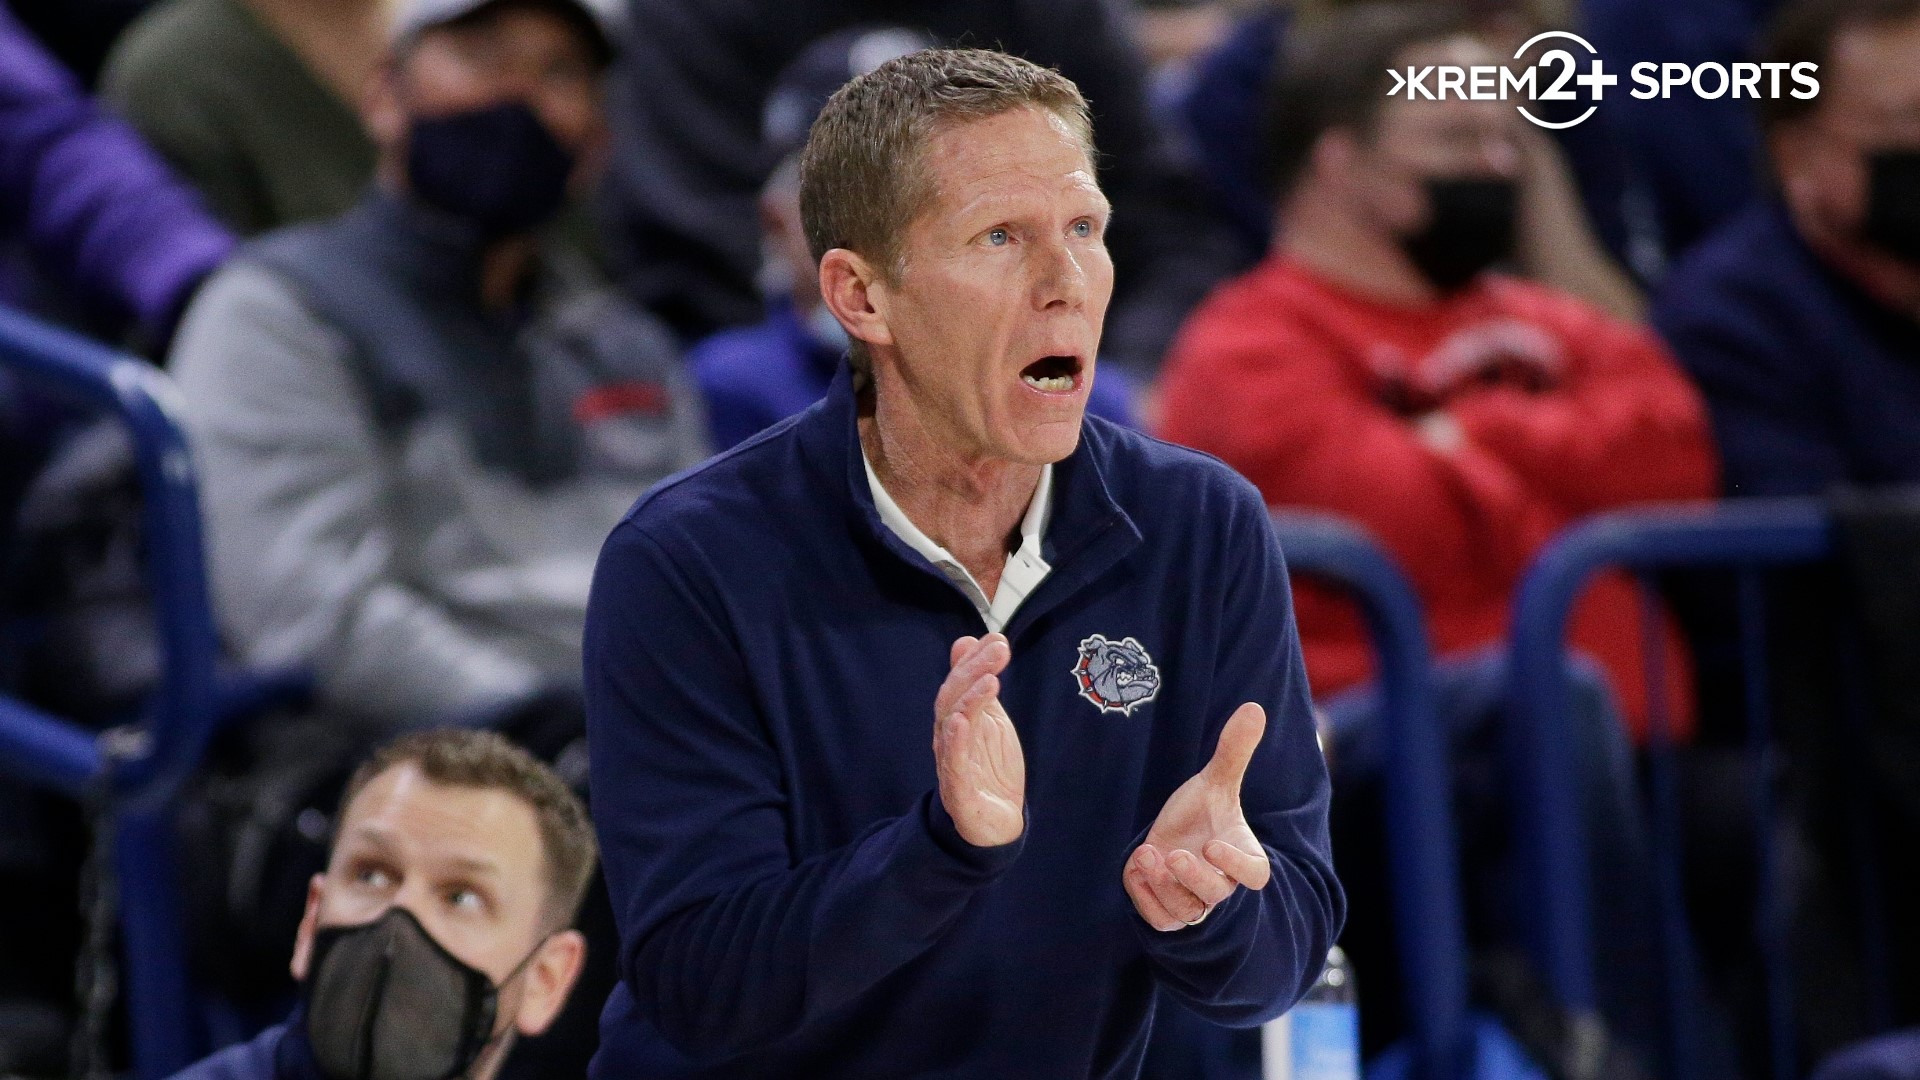 Gary Parrish sat down with KREM on Monday to discuss the Zags' very important offseason week, his thoughts on the roster, and the program's doubters.